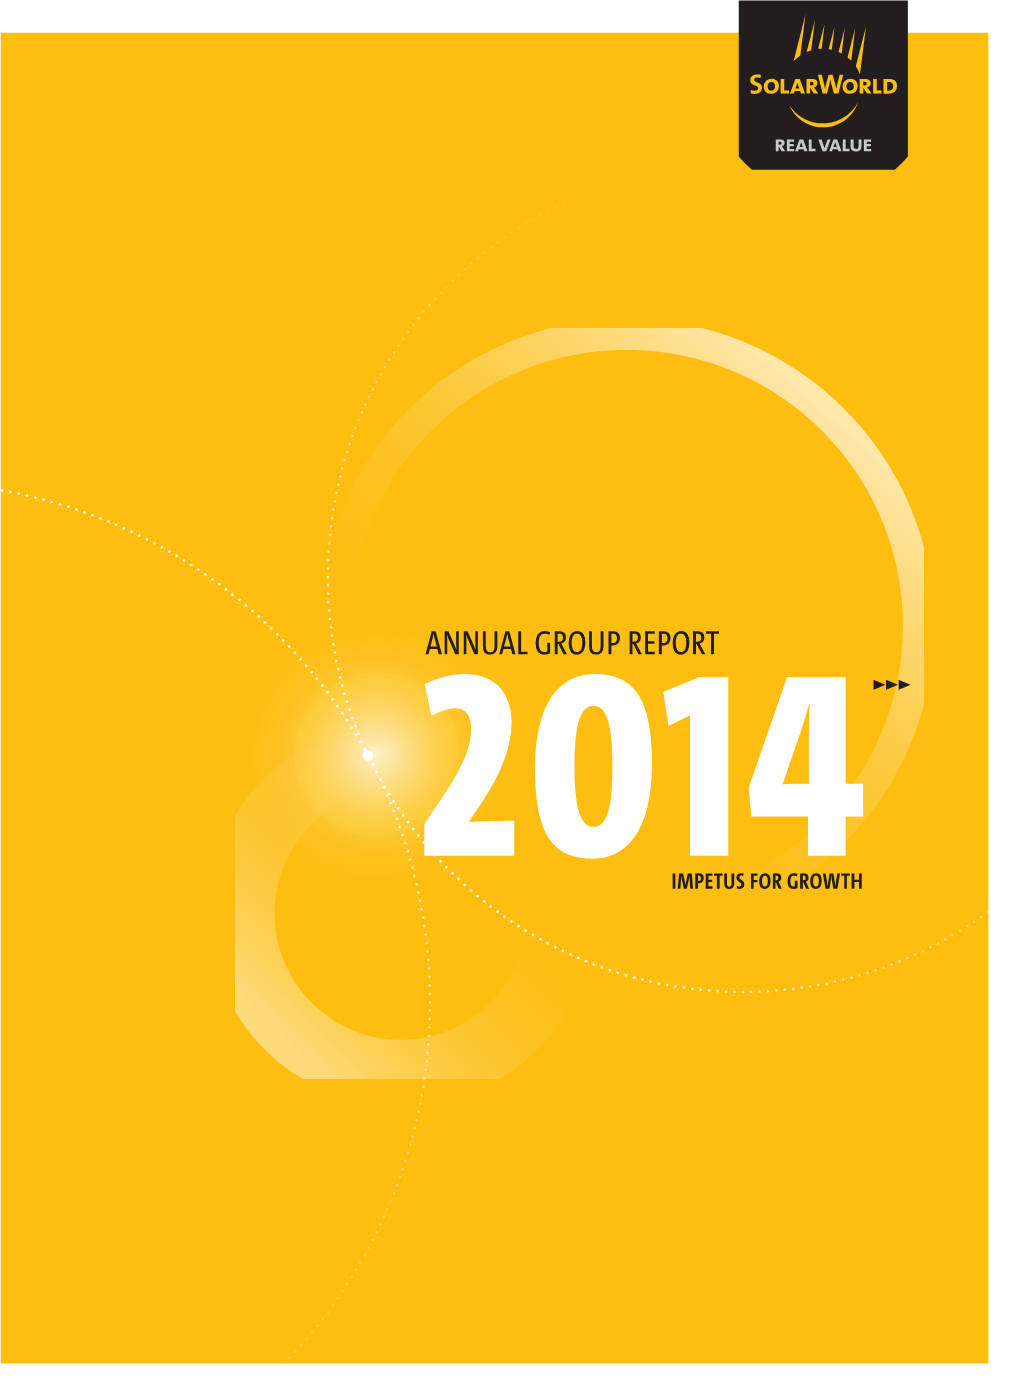 Annual Group Report 2014 2014 Annual Report Group Impetus for Growth >>> That's Solarworld ⊲⊲⊲